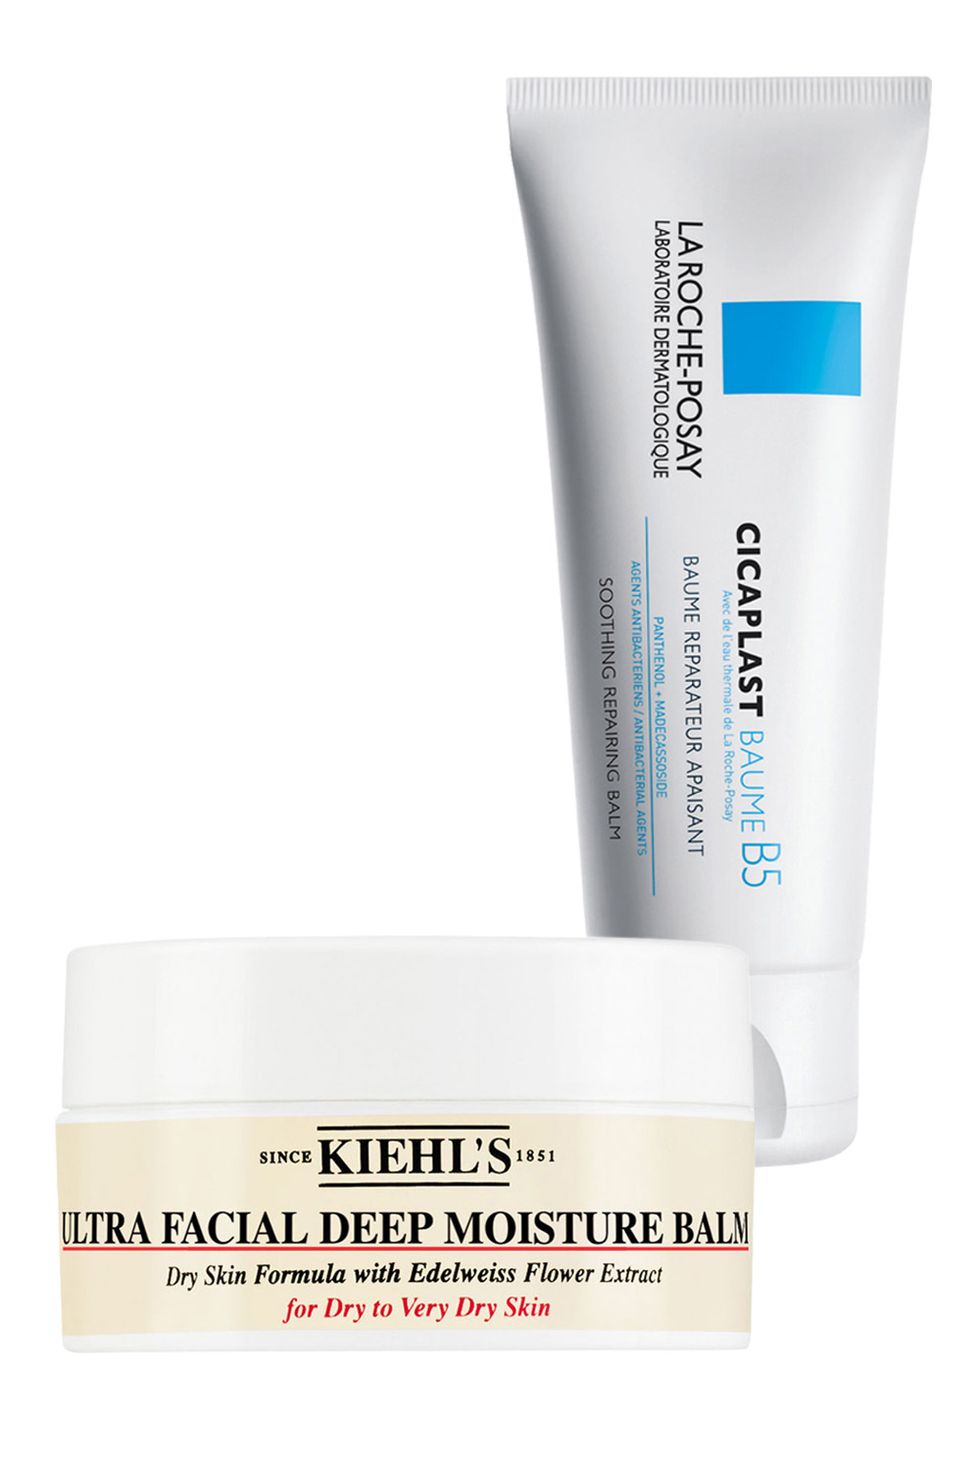 <p>When your skin is seriously thirsty and the aforementioned steps can't quench it, your best bet is the balm. These heavier, more emollient formulas will help repair the barrier function, basically the natural shield that keeps your skin hydrated, so it's protected from the elements and able to maintain moisture levels. Kiehl's added a balm to its <a href="http://www.kiehls.com/ultra-facial-deep-moisture-balm/KHL901.html?dwvar_KHL901_size=1.7%20fl.%20oz.%20Jar#q=balm&start=5" target="_blank">Ultra Facial Deep Moisture</a> range, fortifying the original ingredients with Edelweiss flower extract, a plant that thrives high in the hills that are alive with the sound of music. If it sounds a little too rich for your taste, then the mattifying <a href="http://www.laroche-posay.us/cicaplast-baume-b5-3606000437449.html" target="_blank">La Roche-Posay Cicaplast Baume B5</a> lays down might be more your speed.</p>